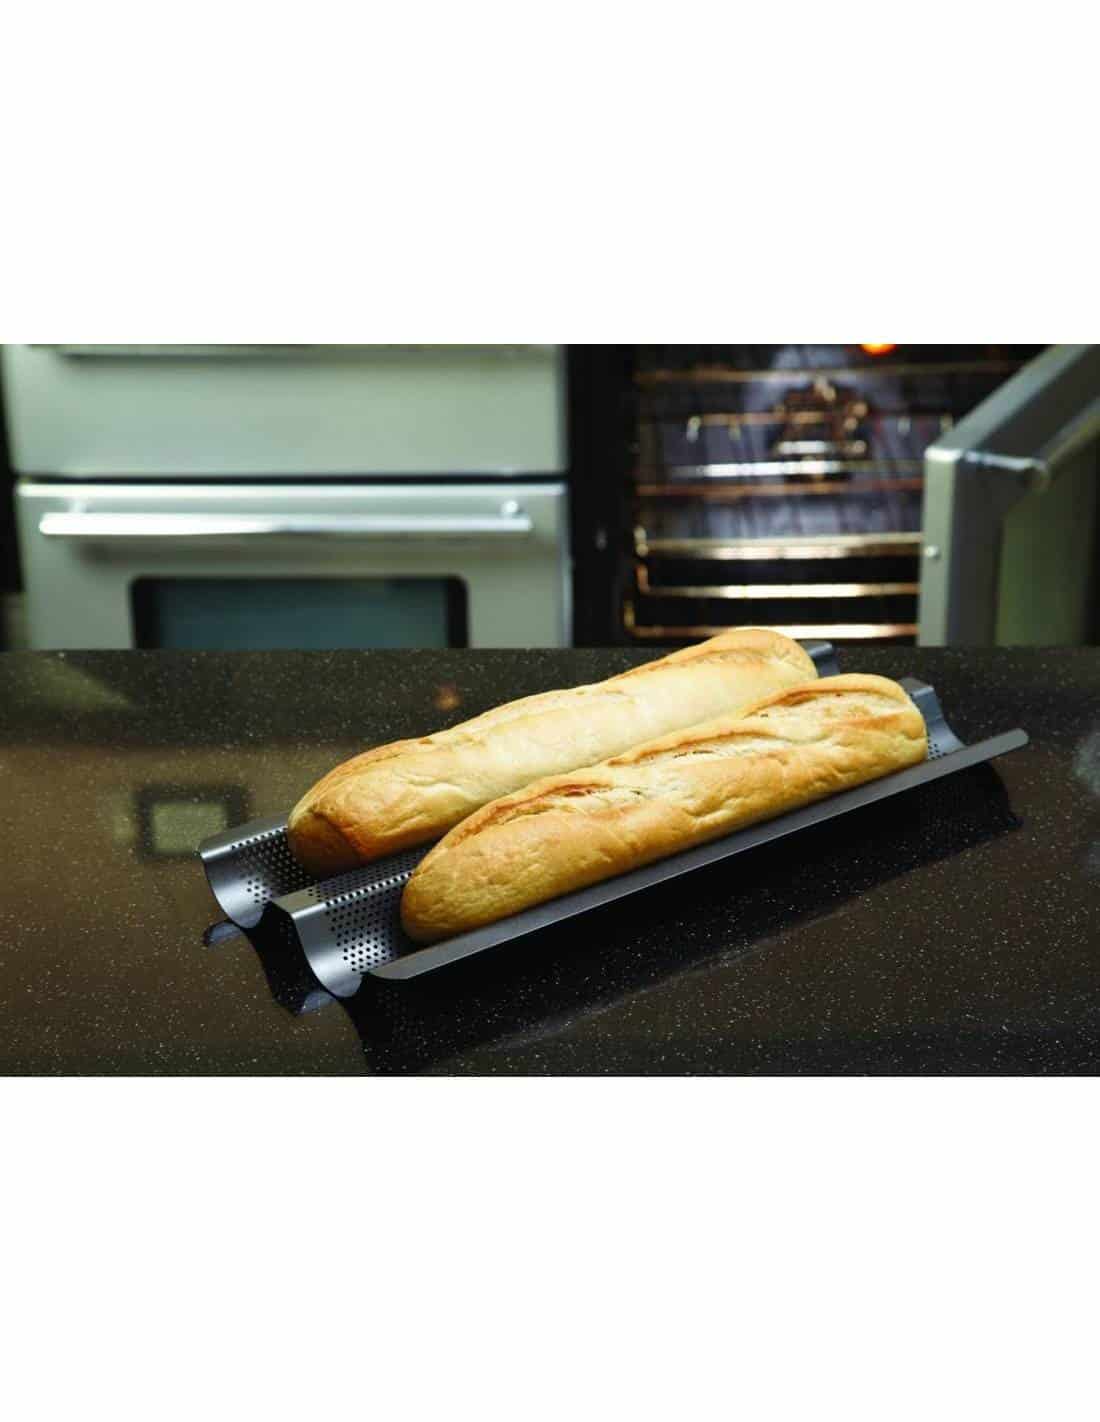 https://www.mimocook.com/17927-thickbox_default/kitchen-craft-master-class-crusty-bake-non-stick-baguette-tray.jpg